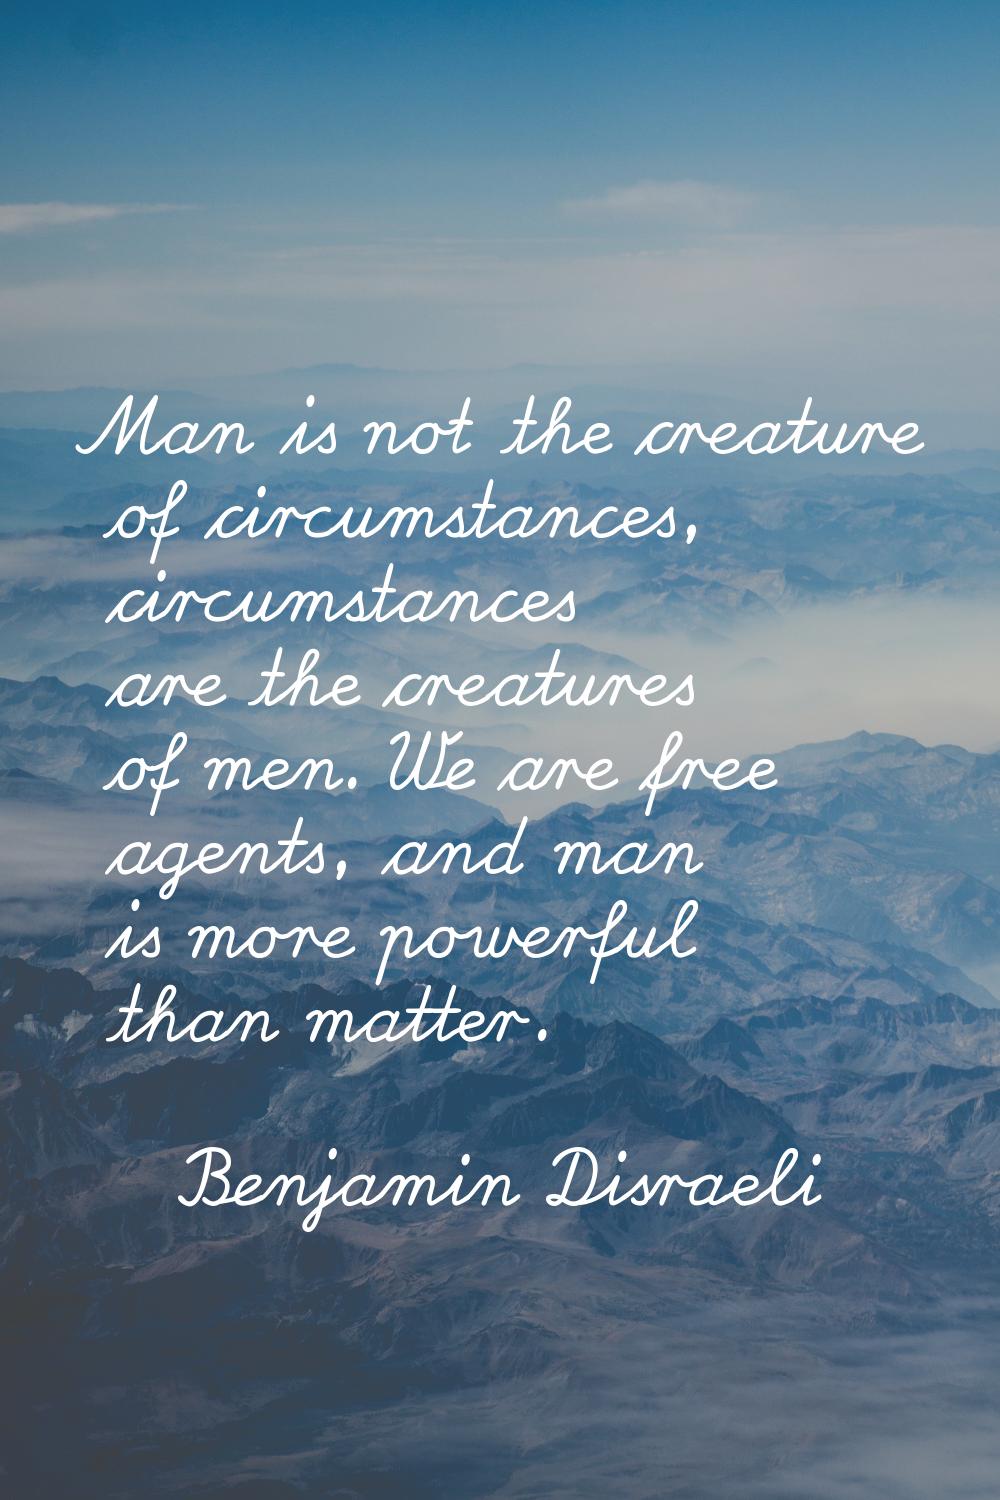 Man is not the creature of circumstances, circumstances are the creatures of men. We are free agent